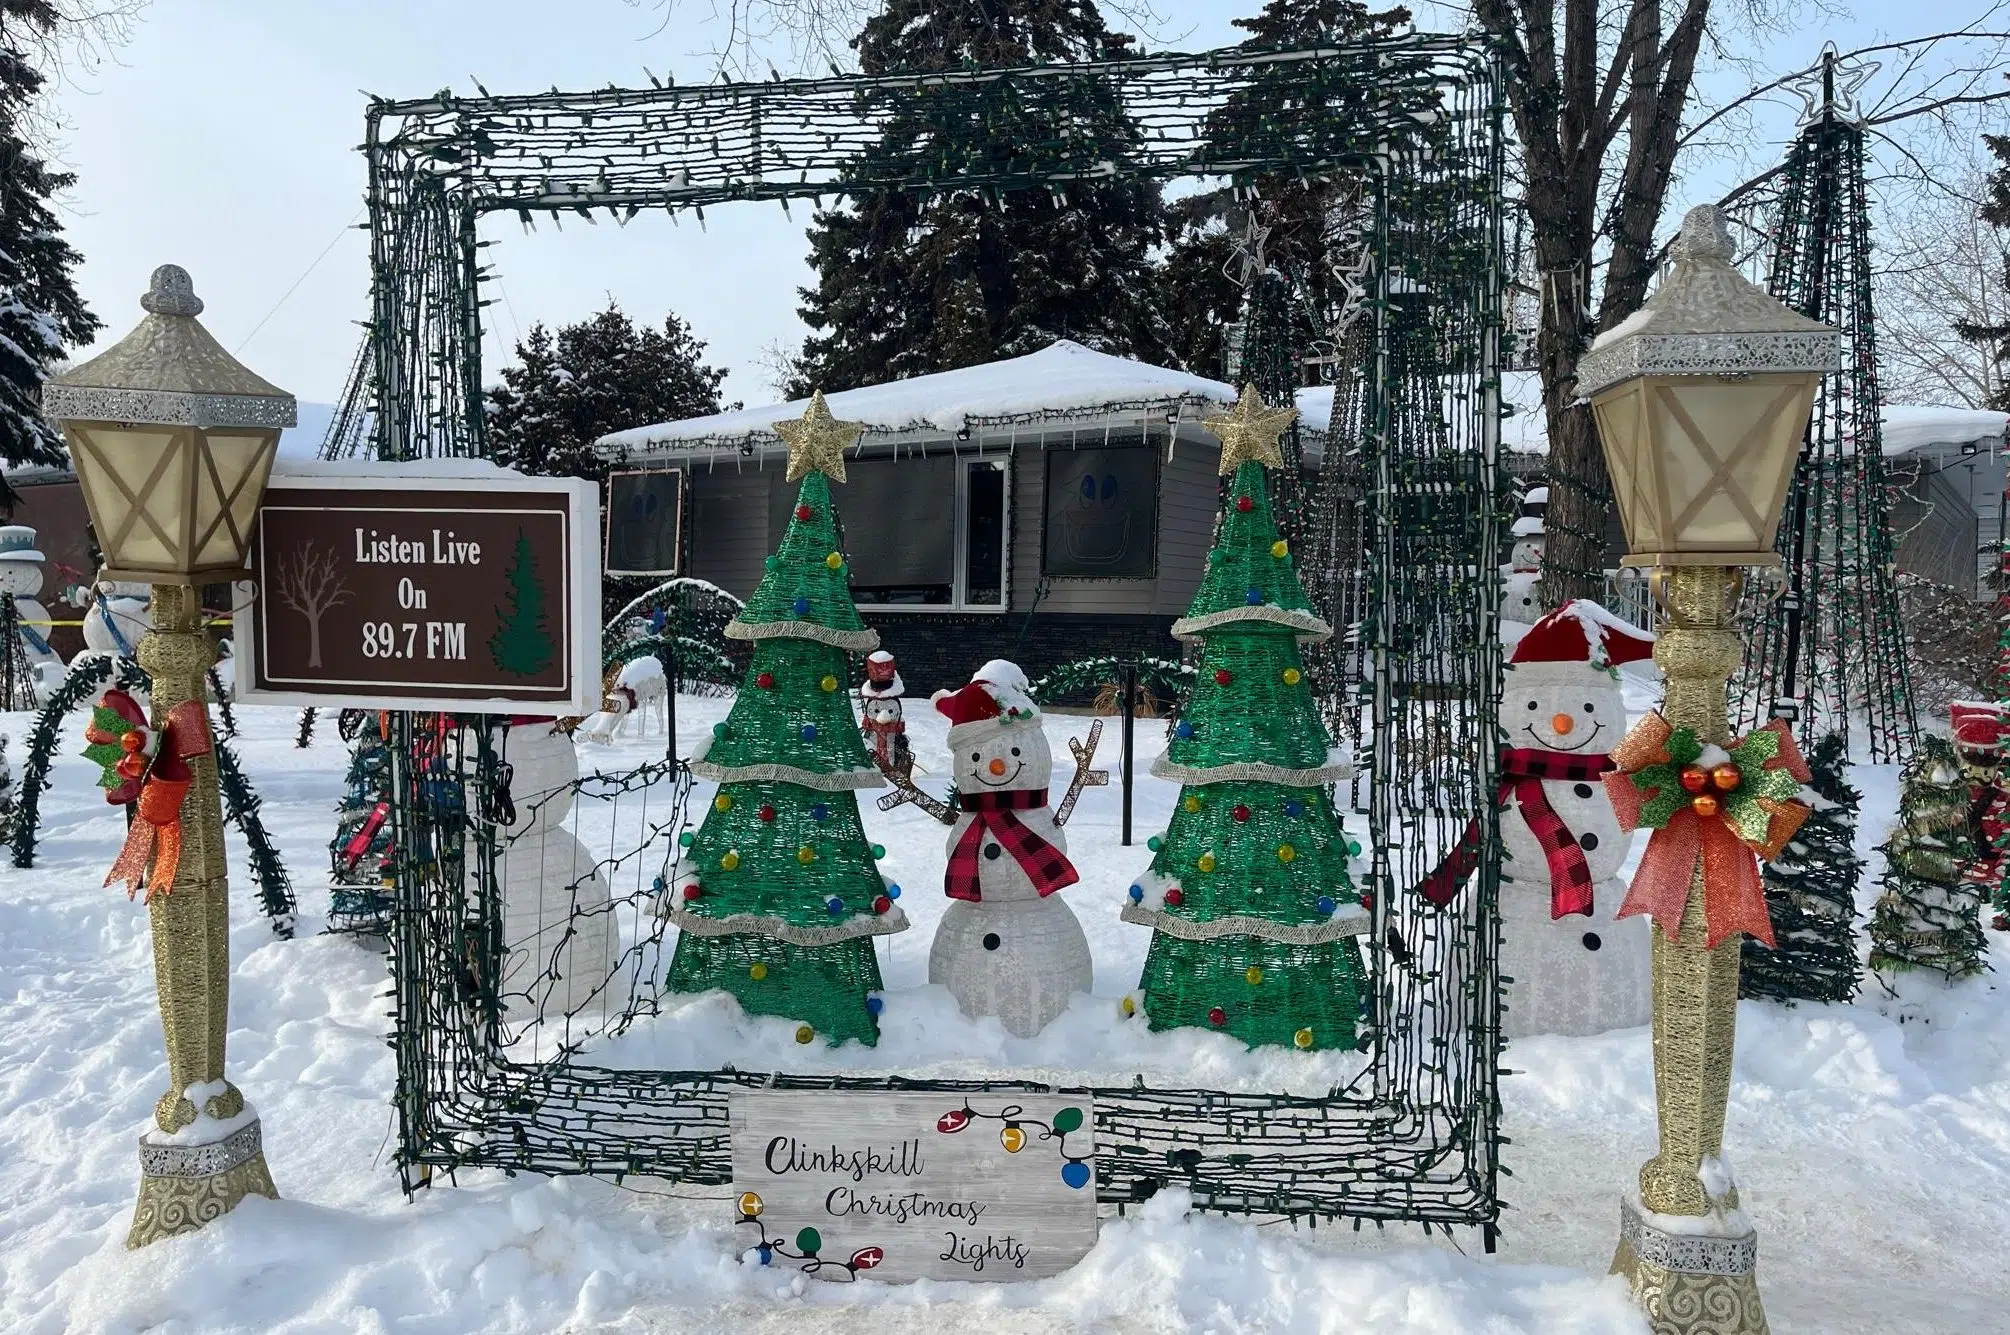 'The end of an era:' Clinkskill Christmas light display flips switch for final time